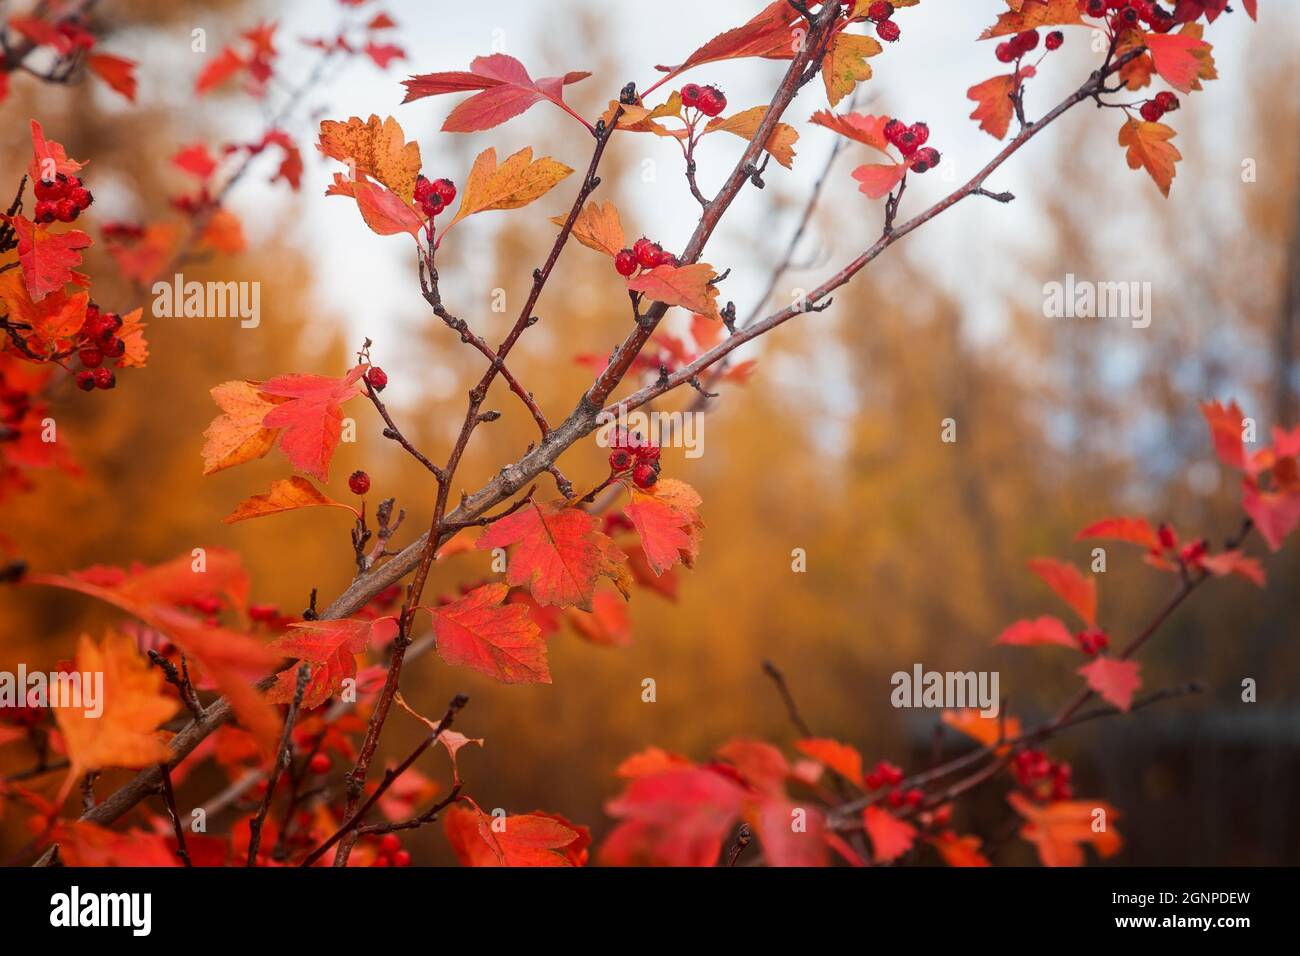 Hawthorn branch with reddened autumn leaves and red berries Stock Photo